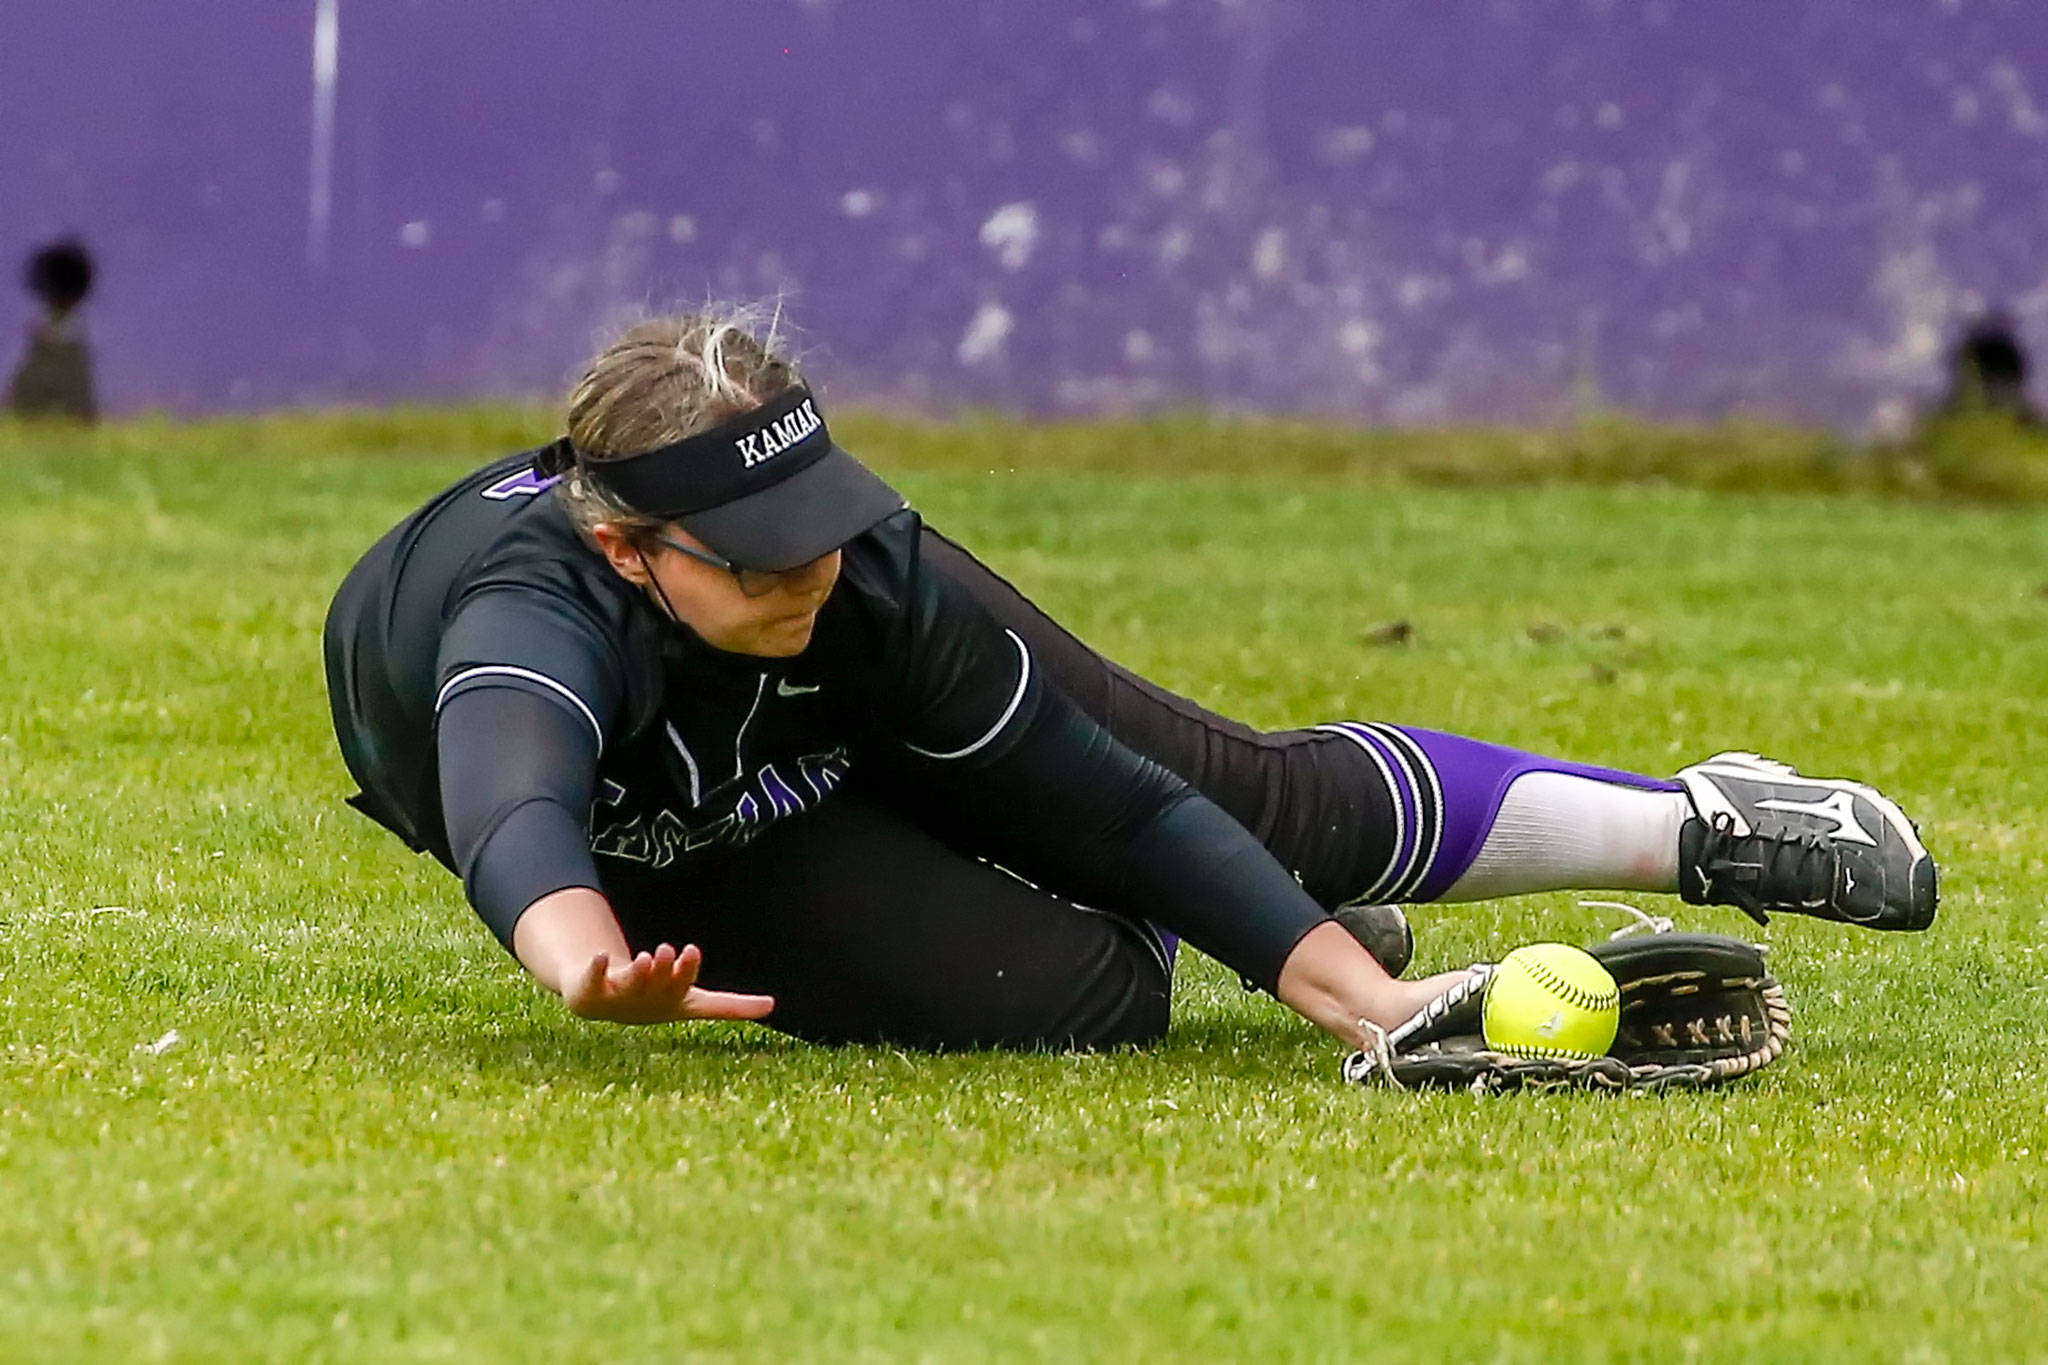 Kamiak’s Sara Schnurman makes a diving catch in the third inning of a game against Lakewood on Friday afternoon at Kamiak High School in Mukilteo. The Knights won 2-0. (Kevin Clark / The Herald)